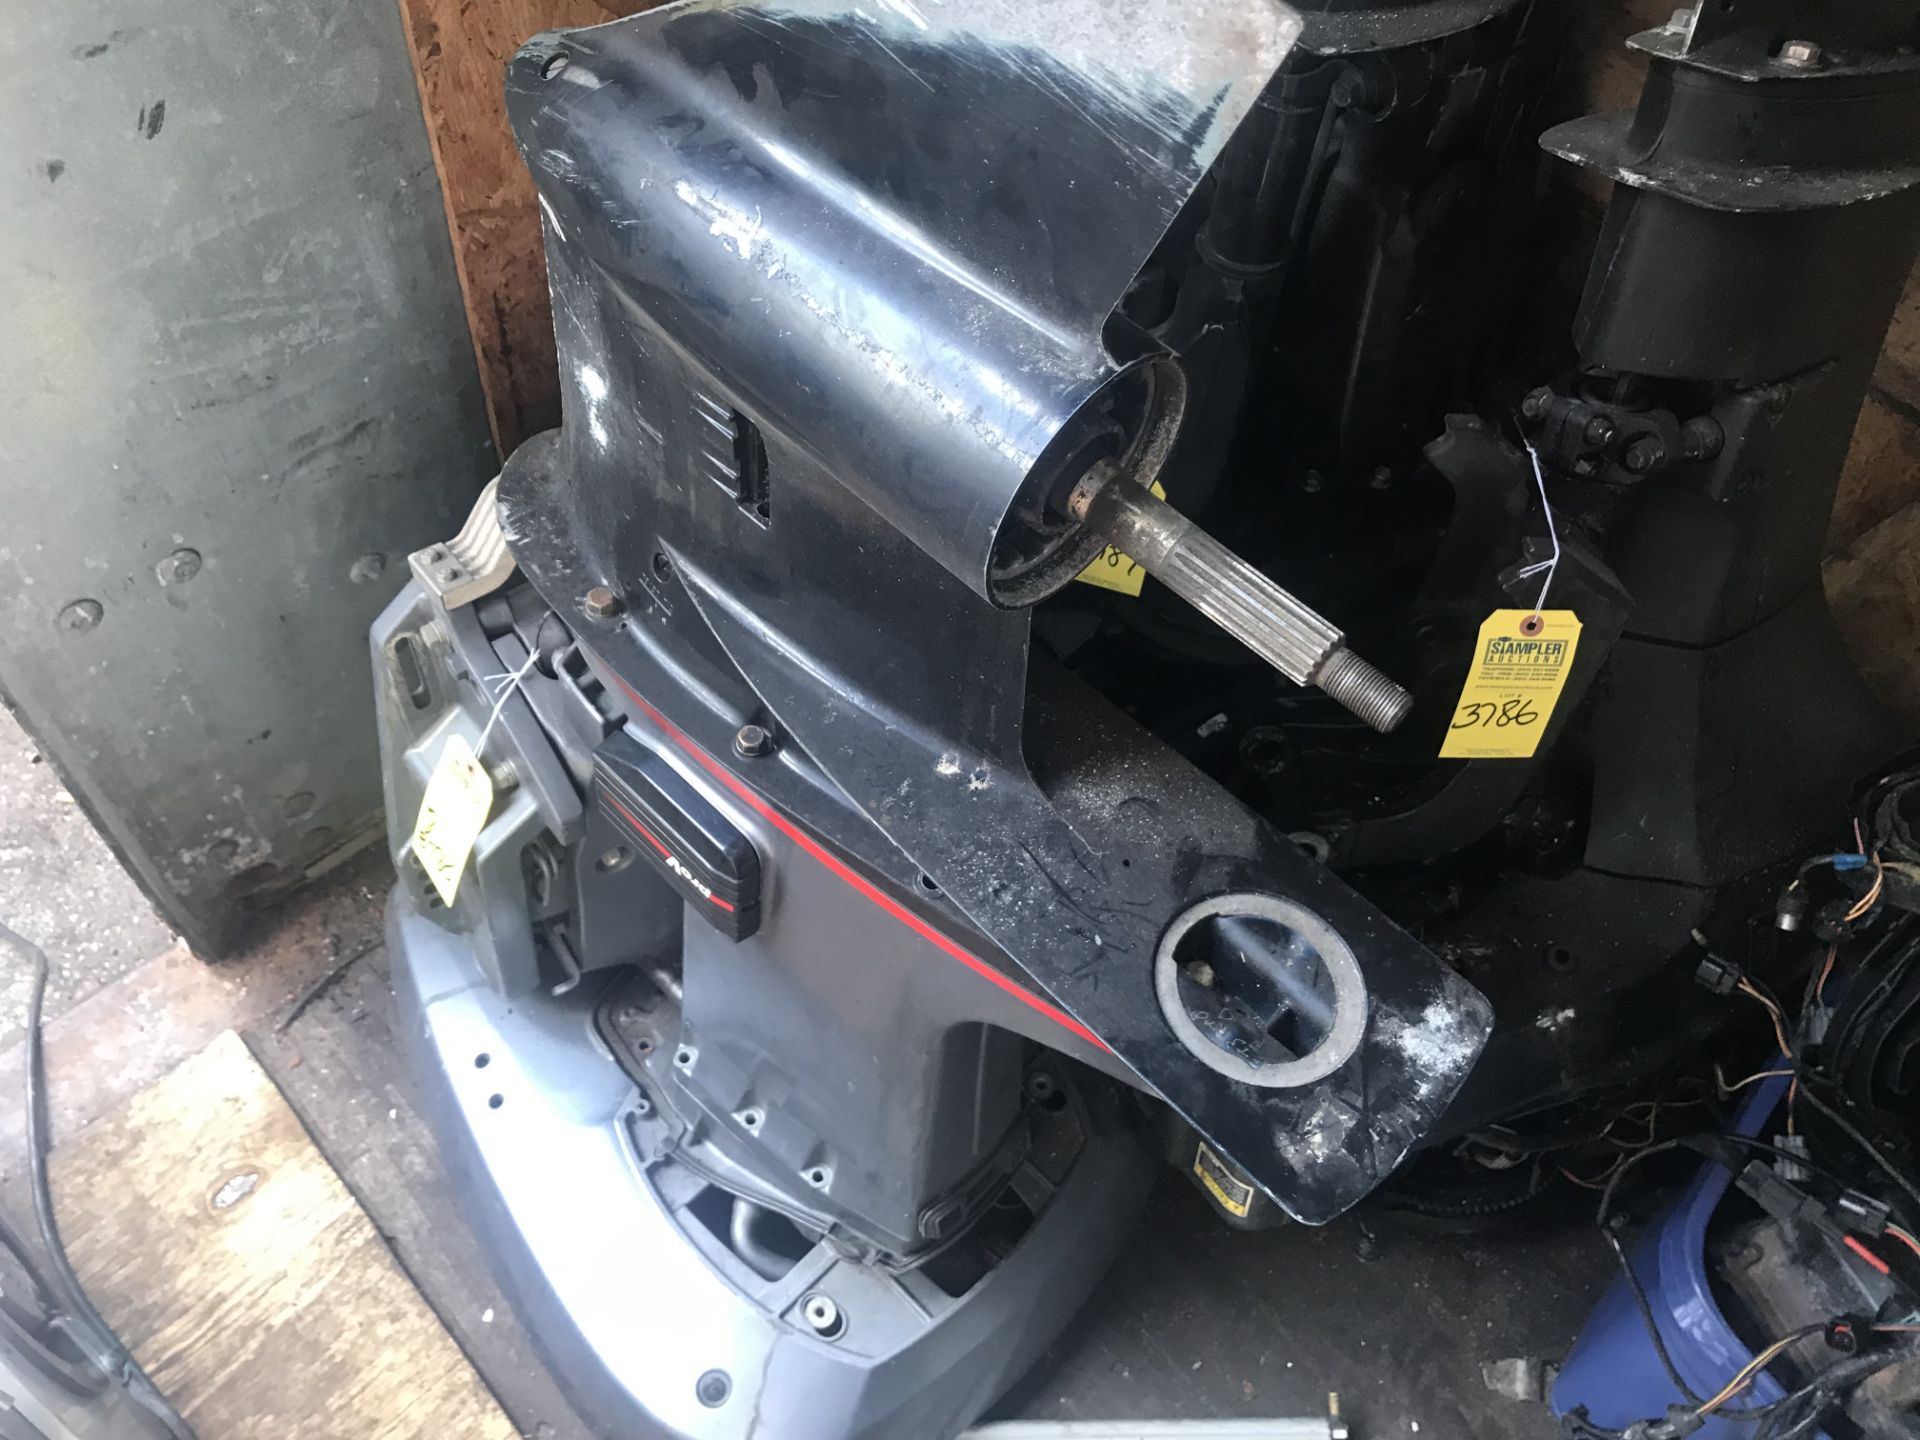 YAMAHA OUTBOARD MOTOR - 150HP (WITH LOWER UNIT & POWER TRAIN)